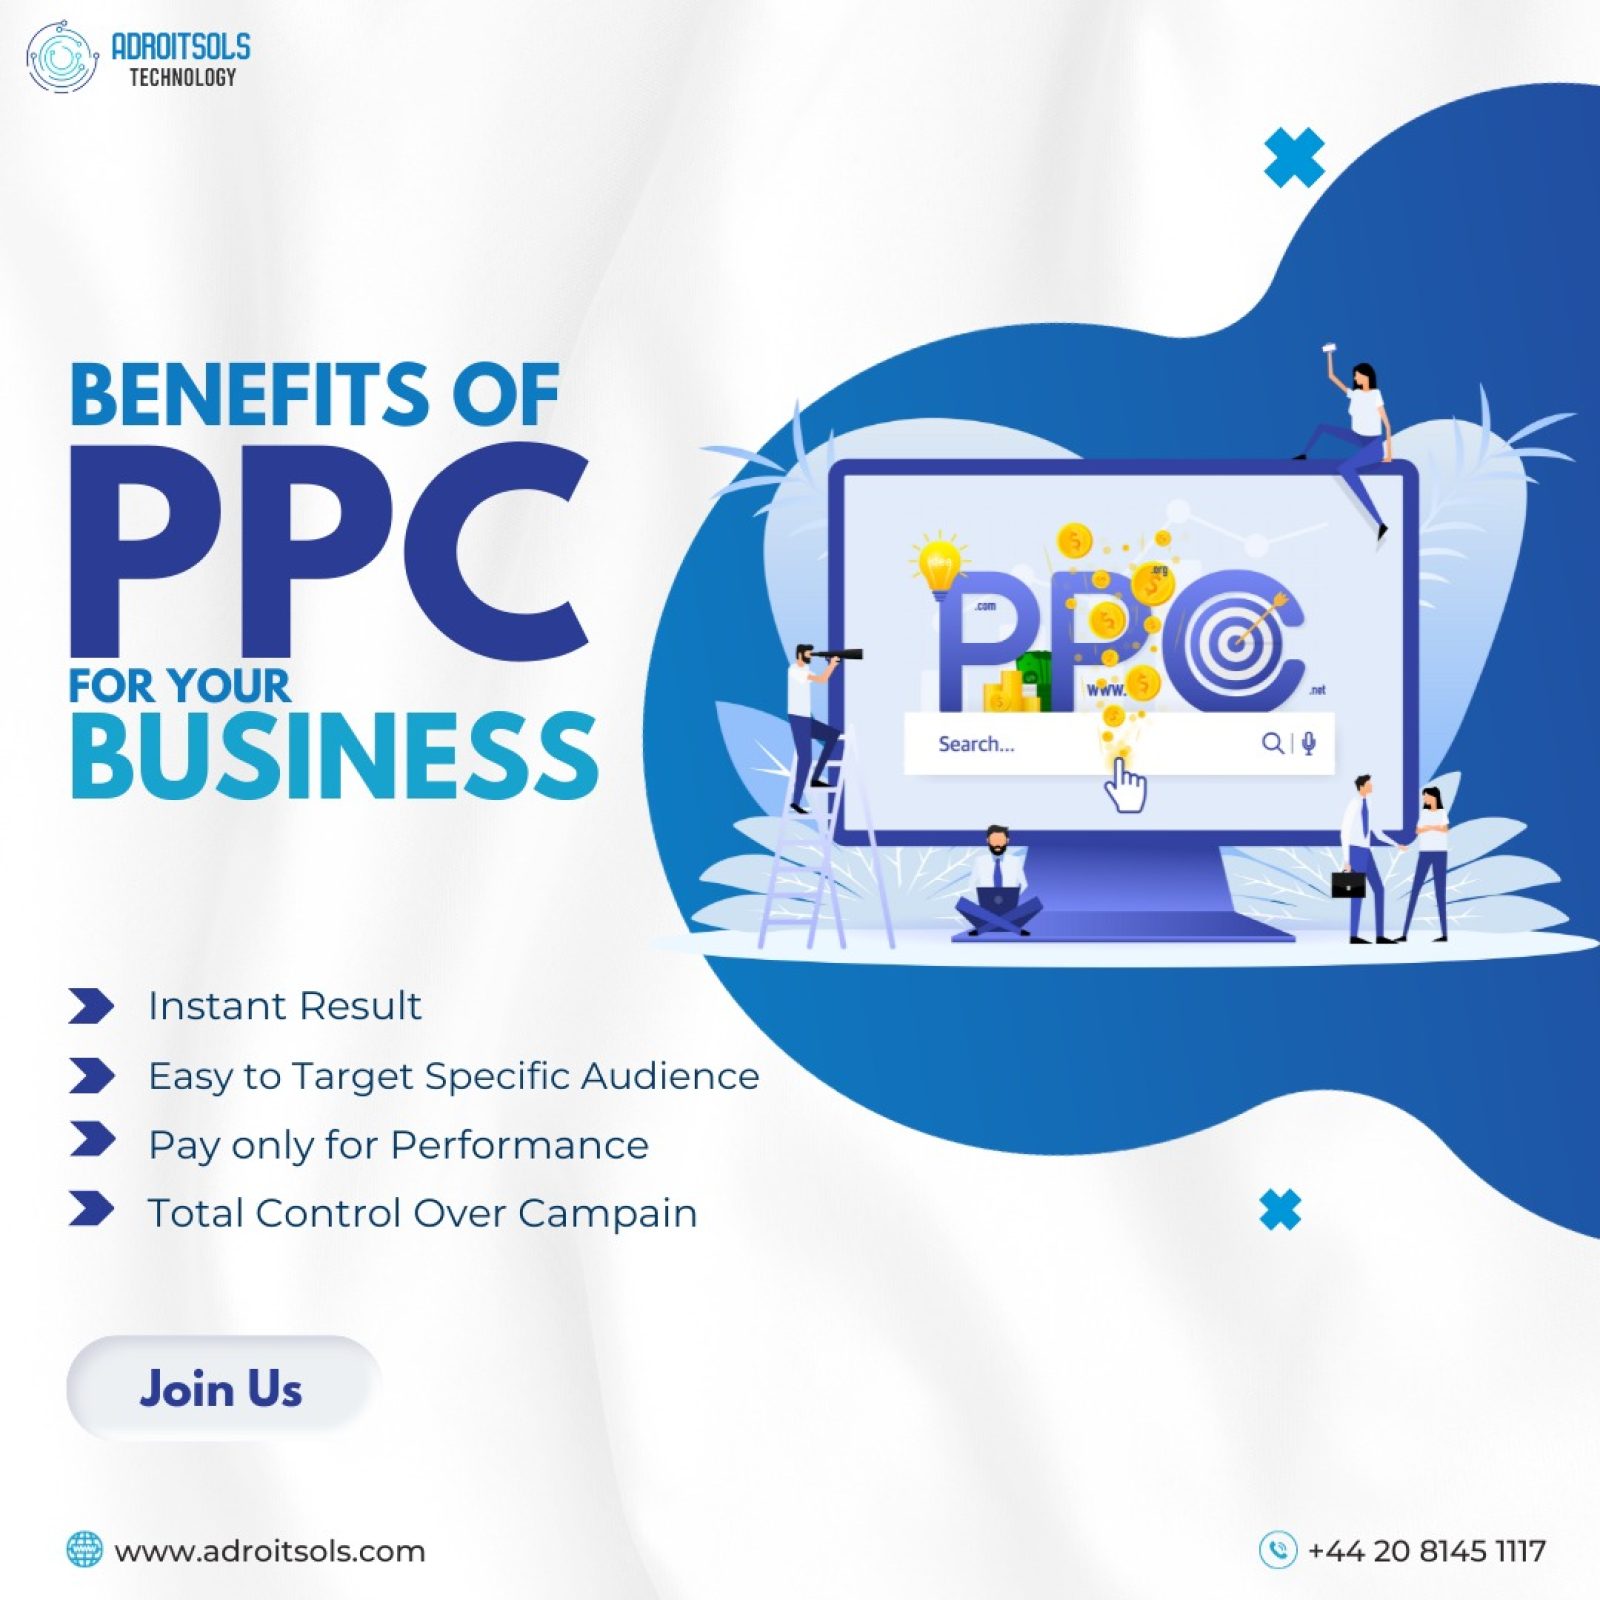 Google PPC Ads | Google PPC | Adroitsols Technology | Your Trusted PPC Advertising Agency in UK